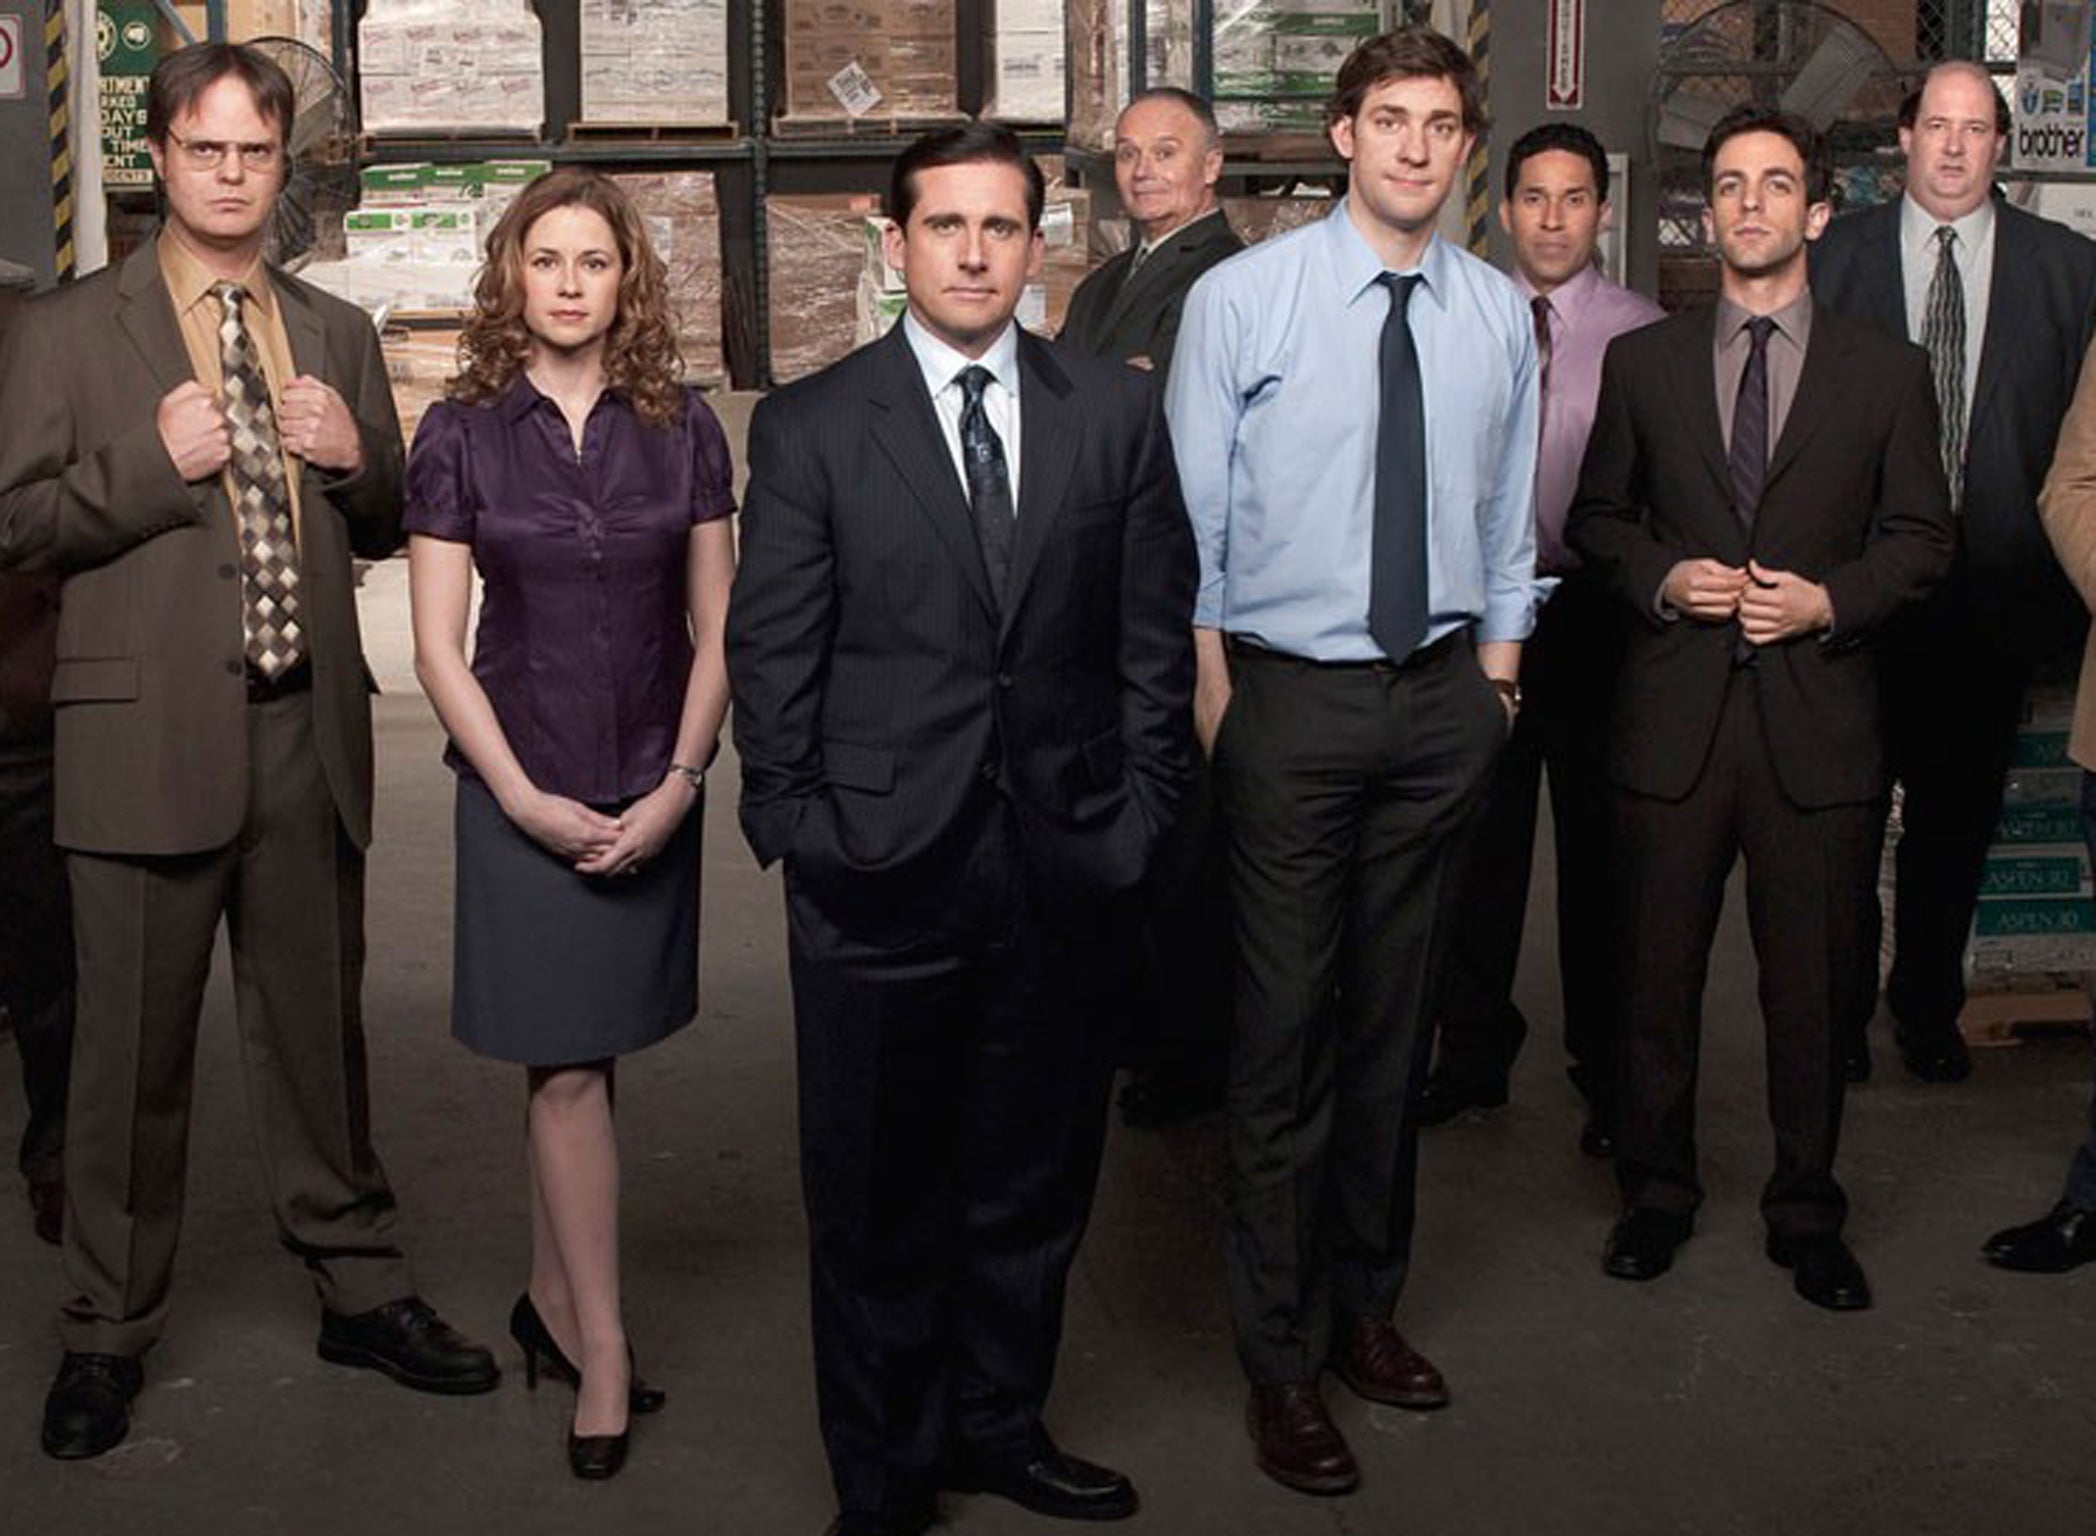 The Office has been a big part of NBC’s schedule for years. It is also a prominent product placer, with plots revolving around such brands as Chili’s and Stap